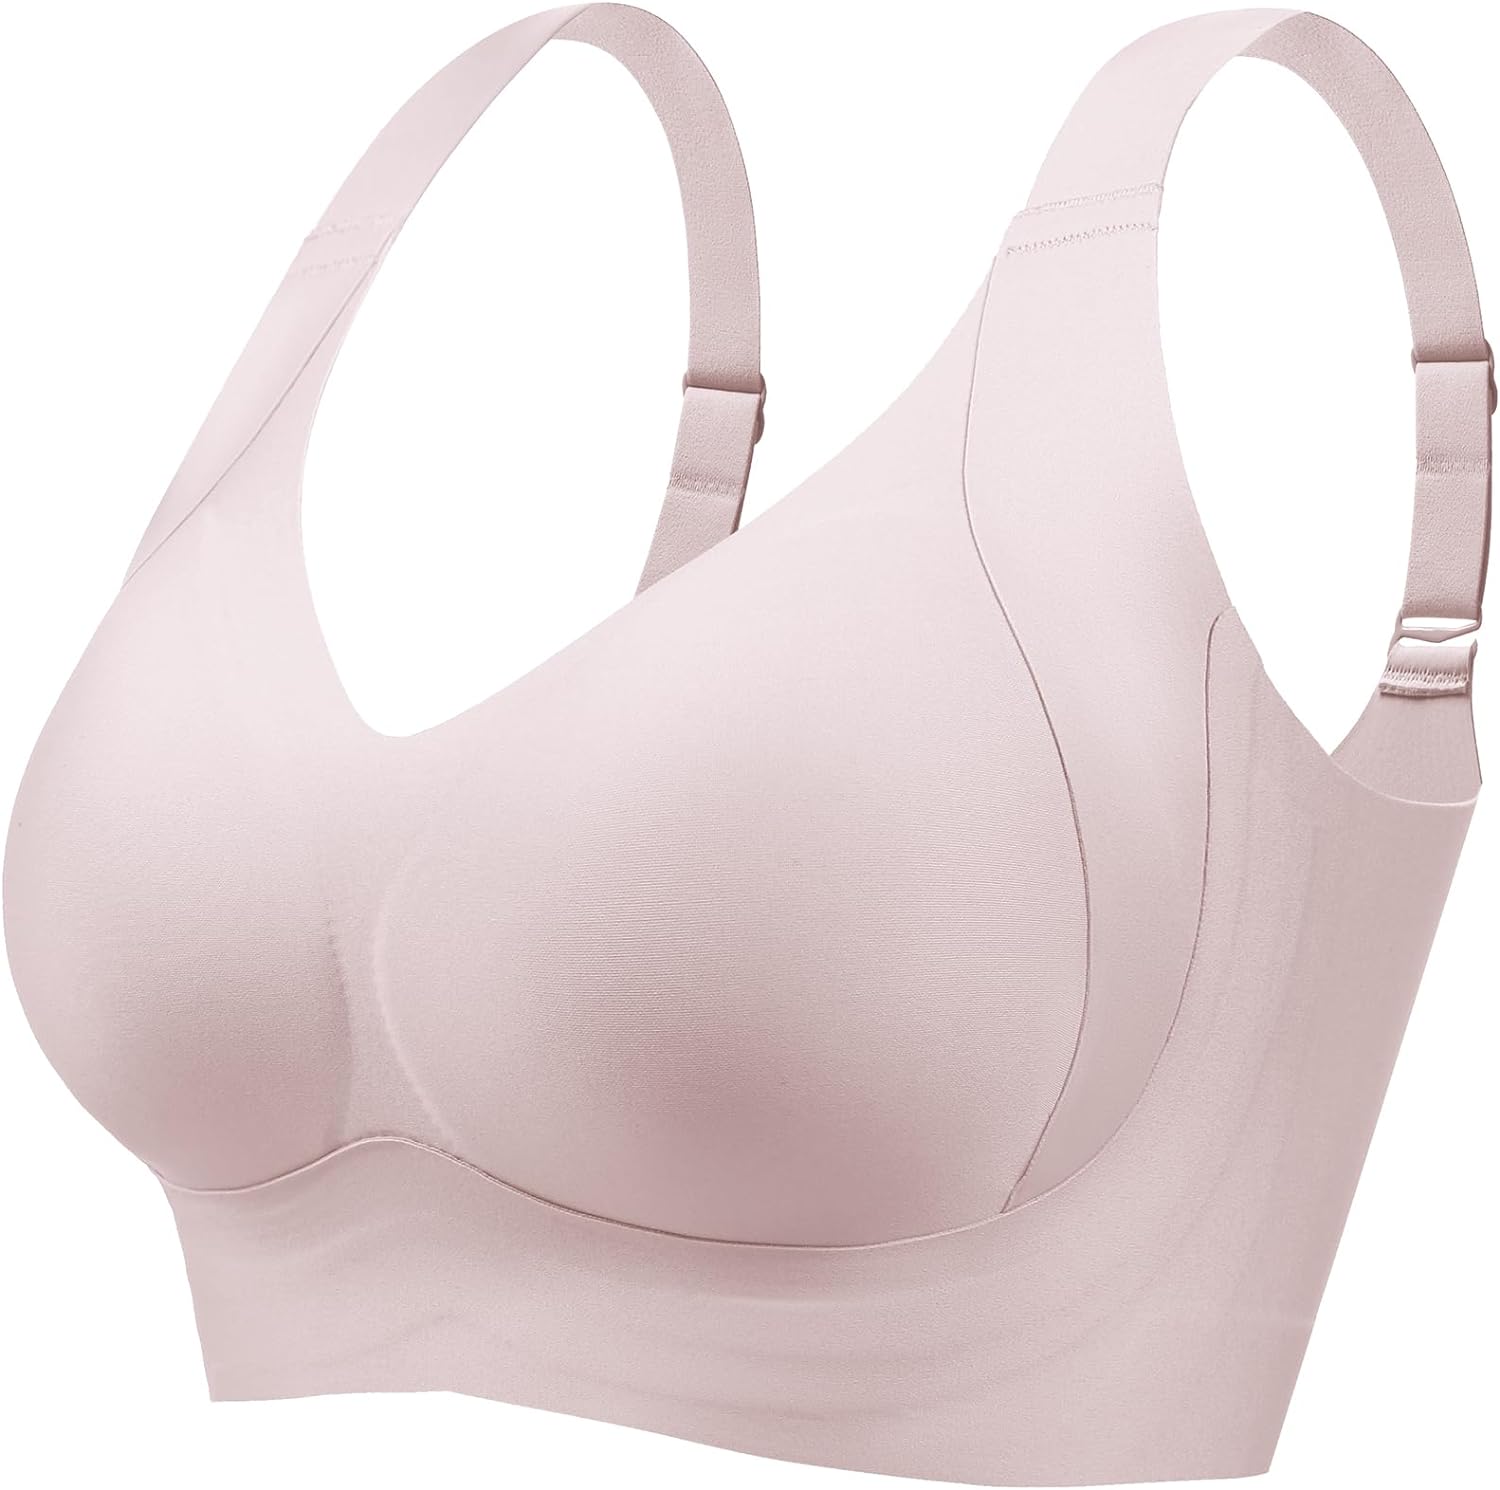 Comfort and Confidence: Say Goodbye to Bras!